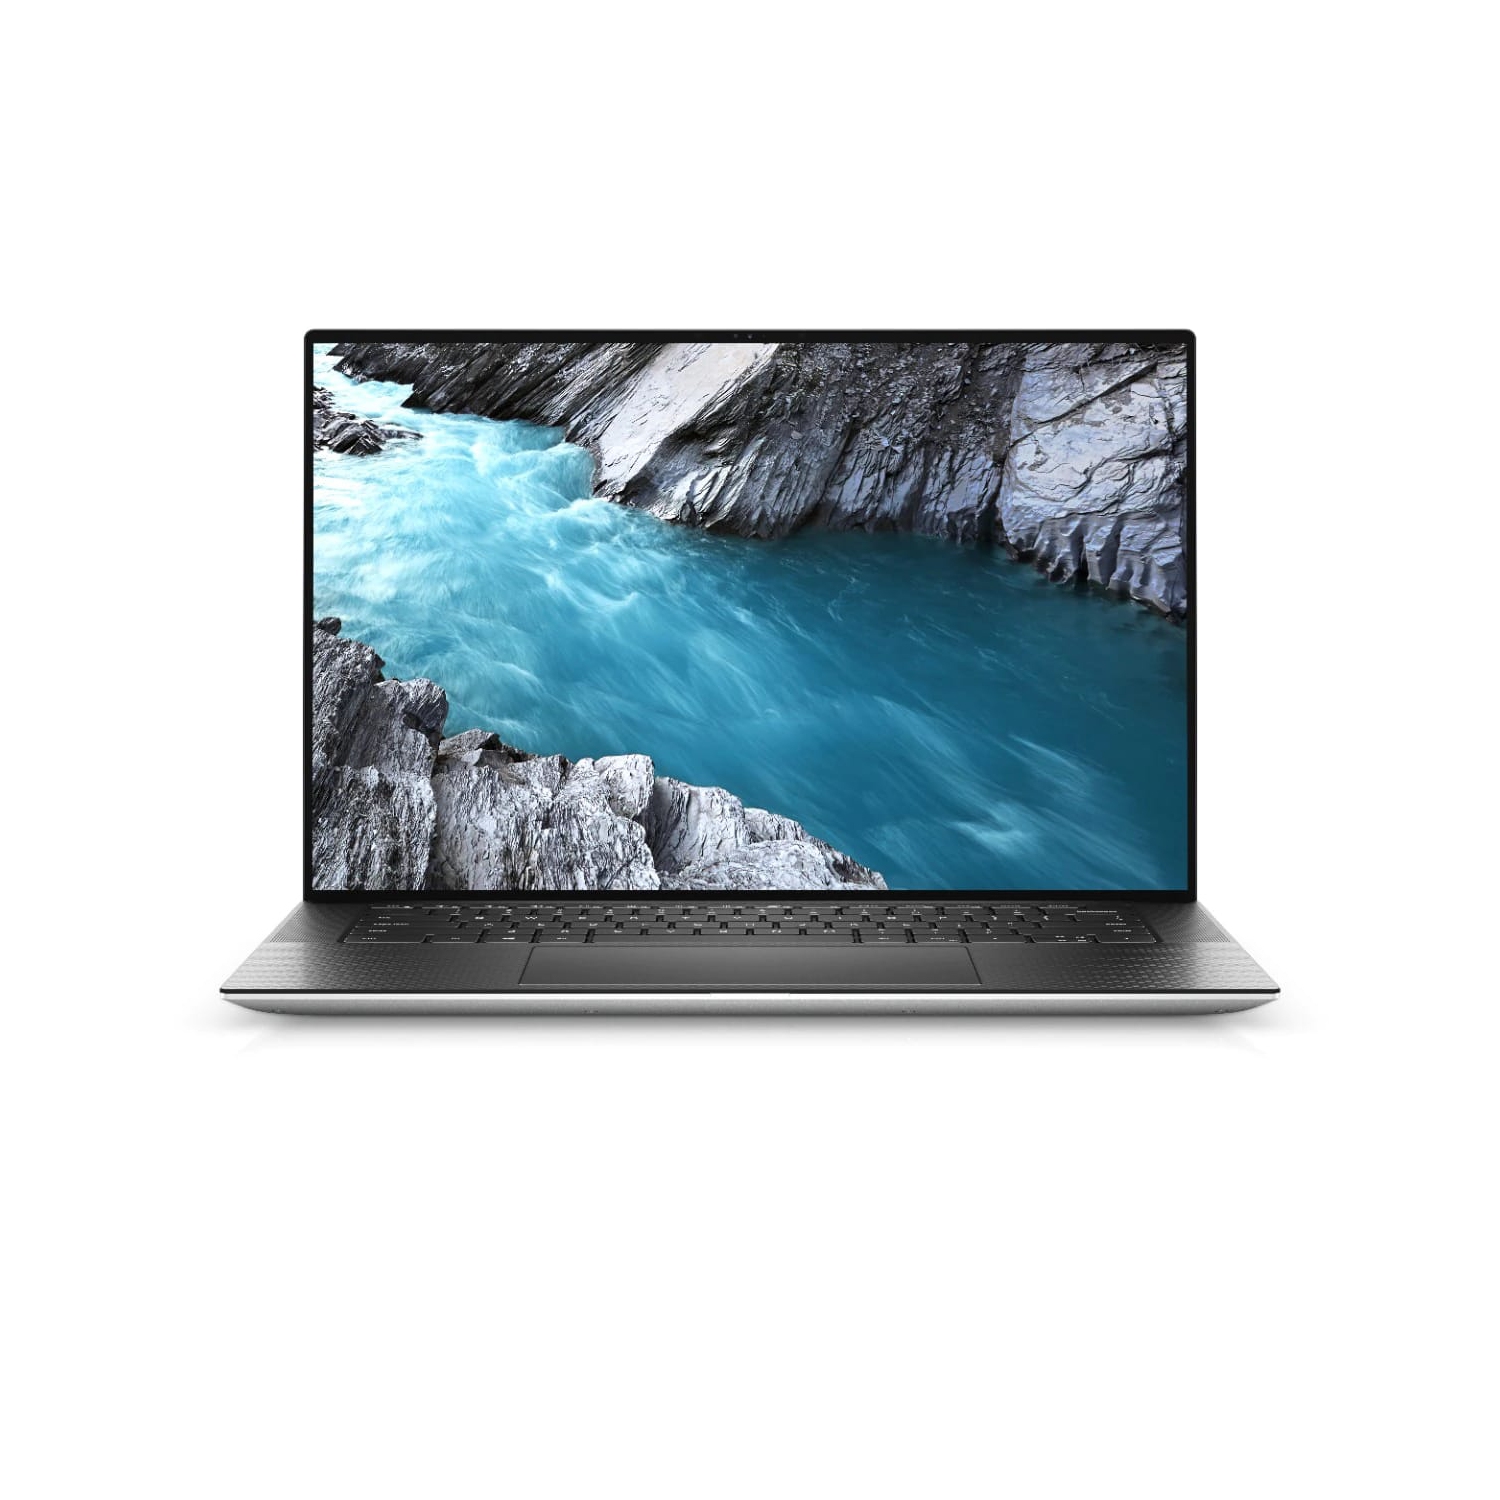 Refurbished (Excellent) - Dell XPS 15 9500 Laptop (2020) | 15" 4K Touch | Core i7 - 2TB SSD - 16GB RAM - 1650 Ti | 8 Cores @ 5.1 GHz - 10th Gen CPU Certified Refurbished